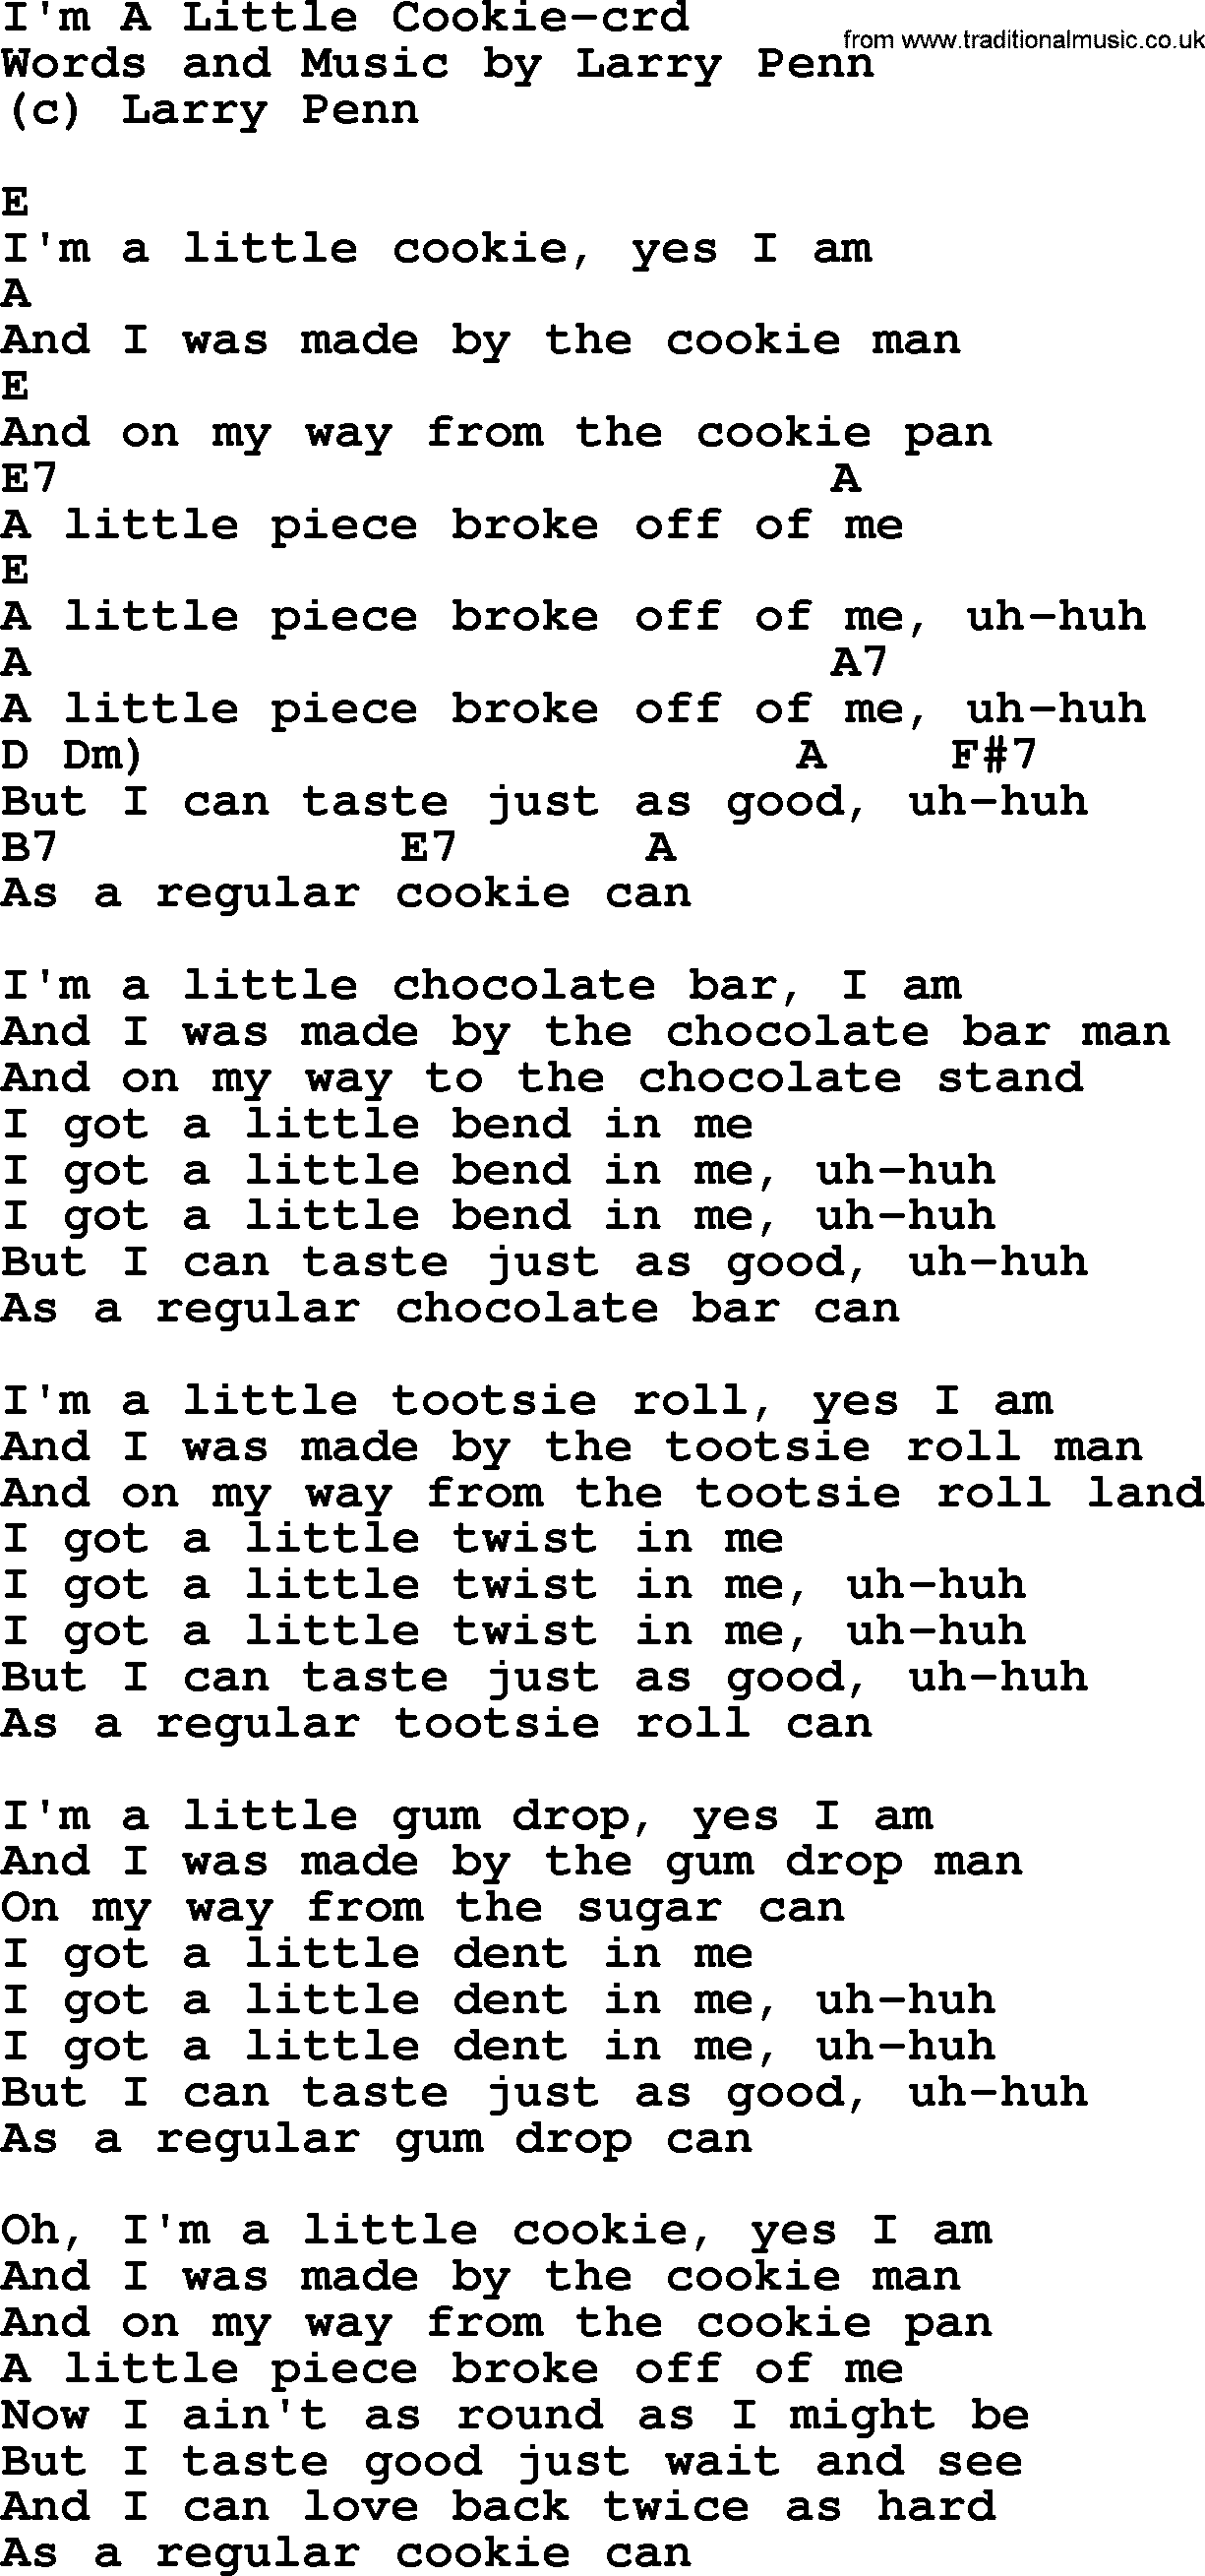 Pete Seeger song I'm A Little Cookie, lyrics and chords